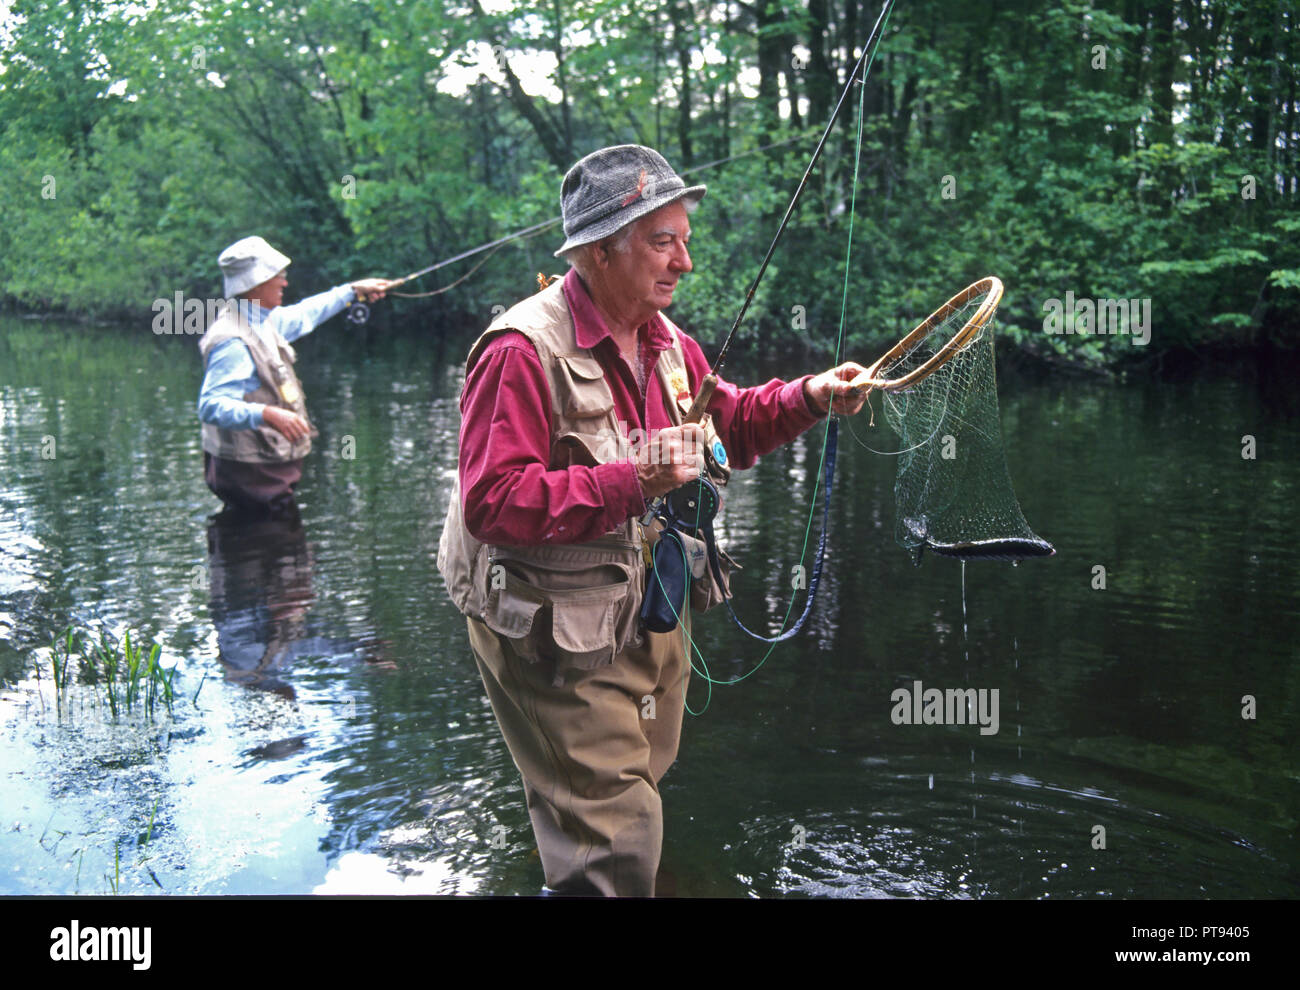 Two senior citizens fly fishing in a river in Massachusetts, USA Stock Photo